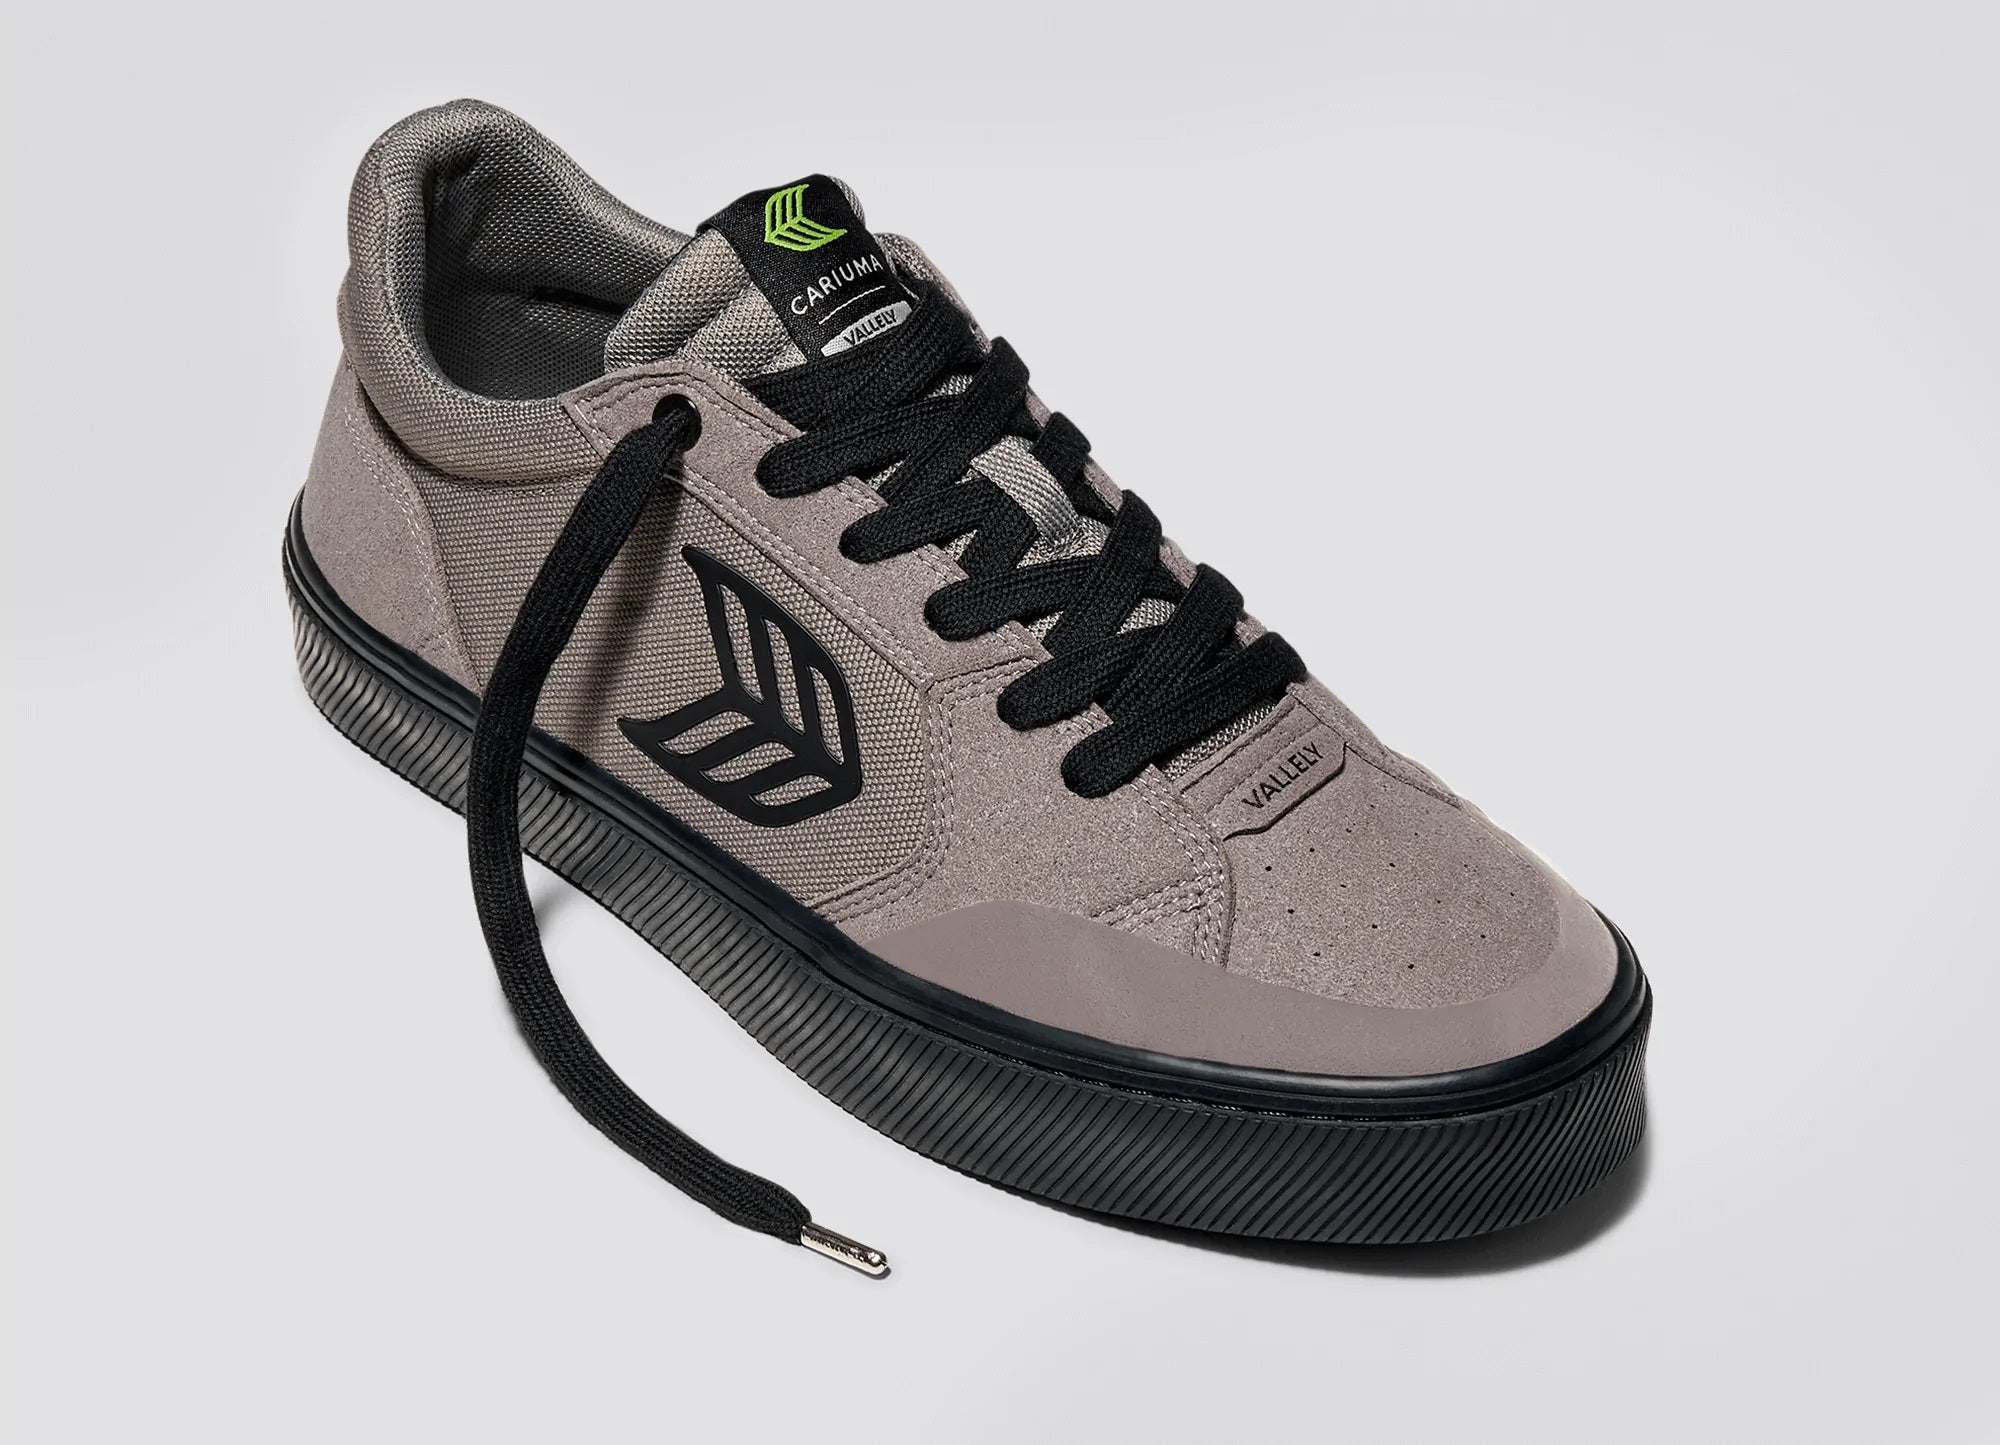 Cariuma Vallely Skate Charcoal Grey Suede And Cordura